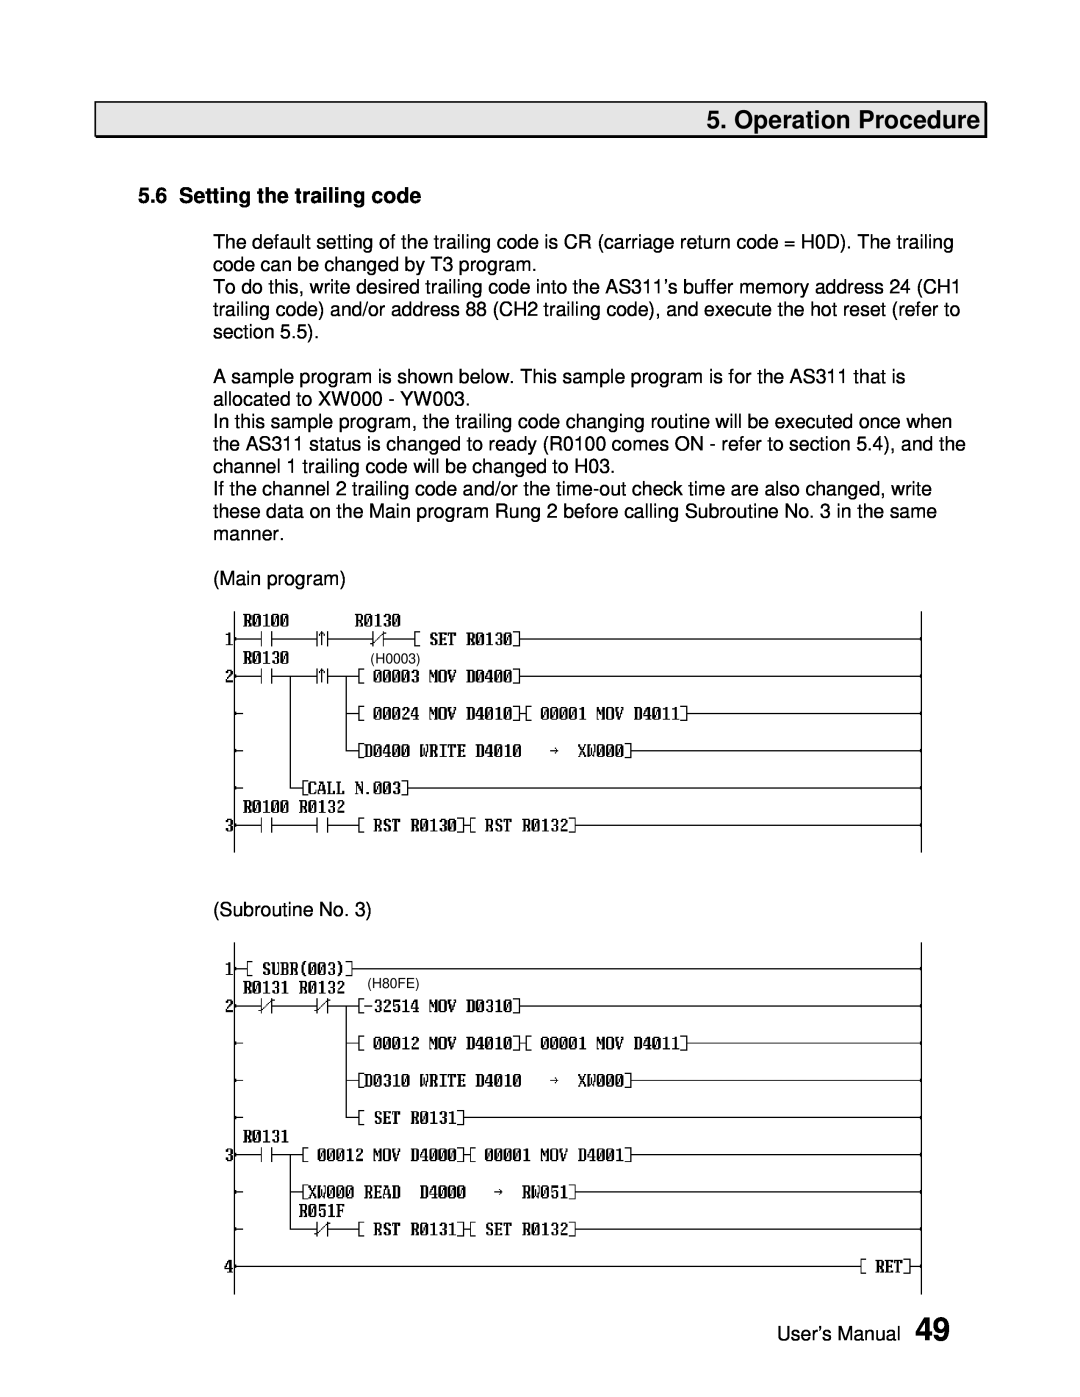 Toshiba AS311 user manual Setting the trailing code, Operation Procedure, H0003, H80FE 